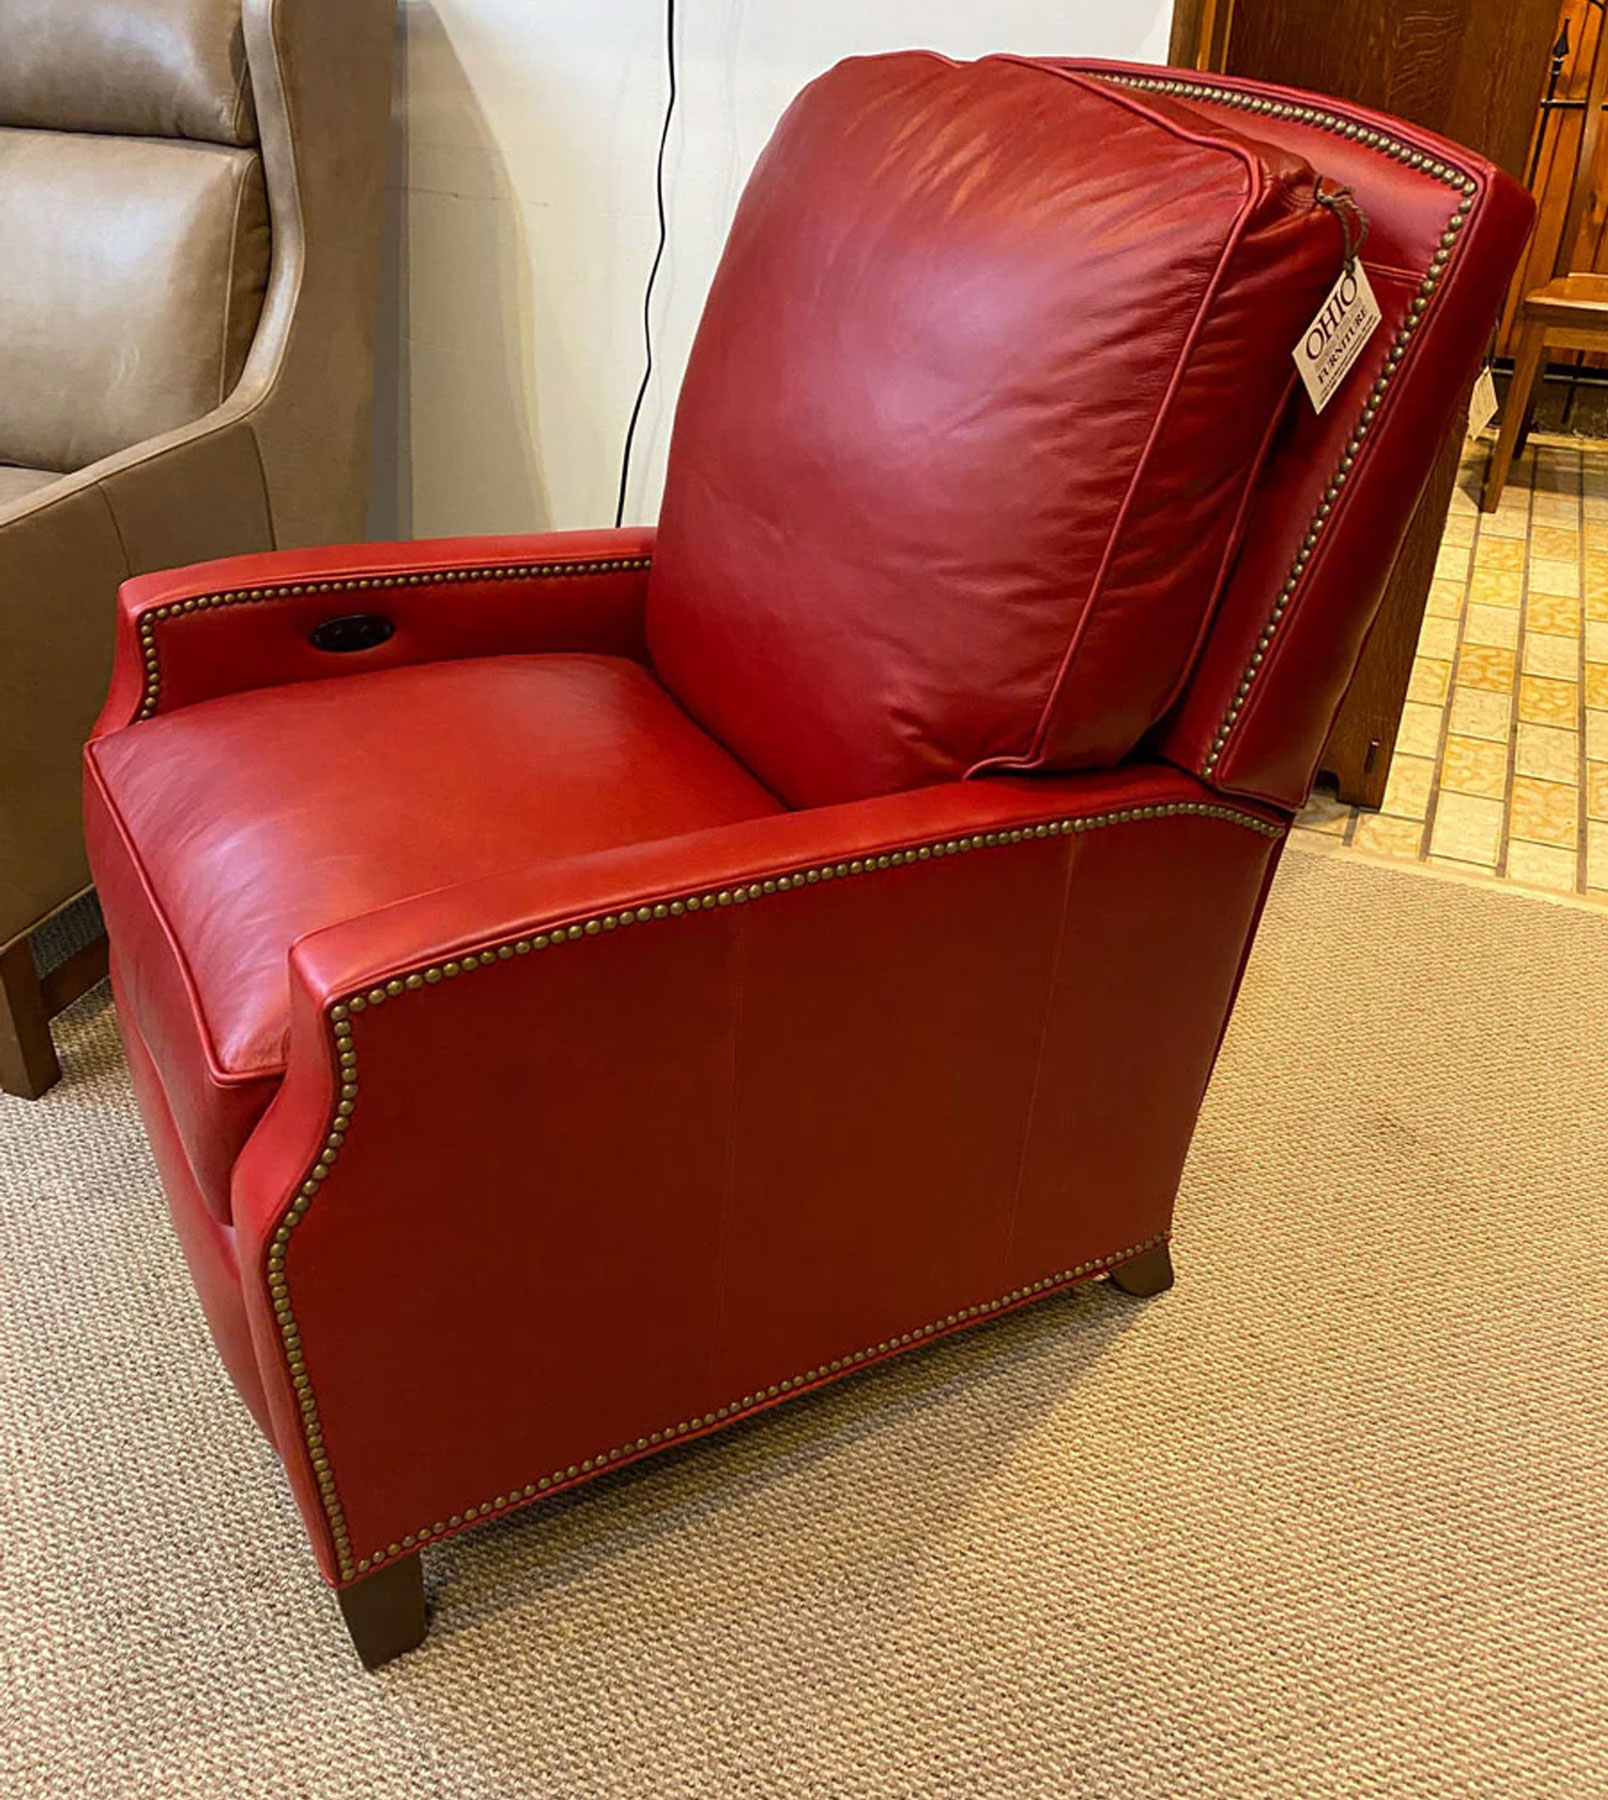 Our House 531-RE Barrington Electric Recliner in Kalel Cherry Red Leather